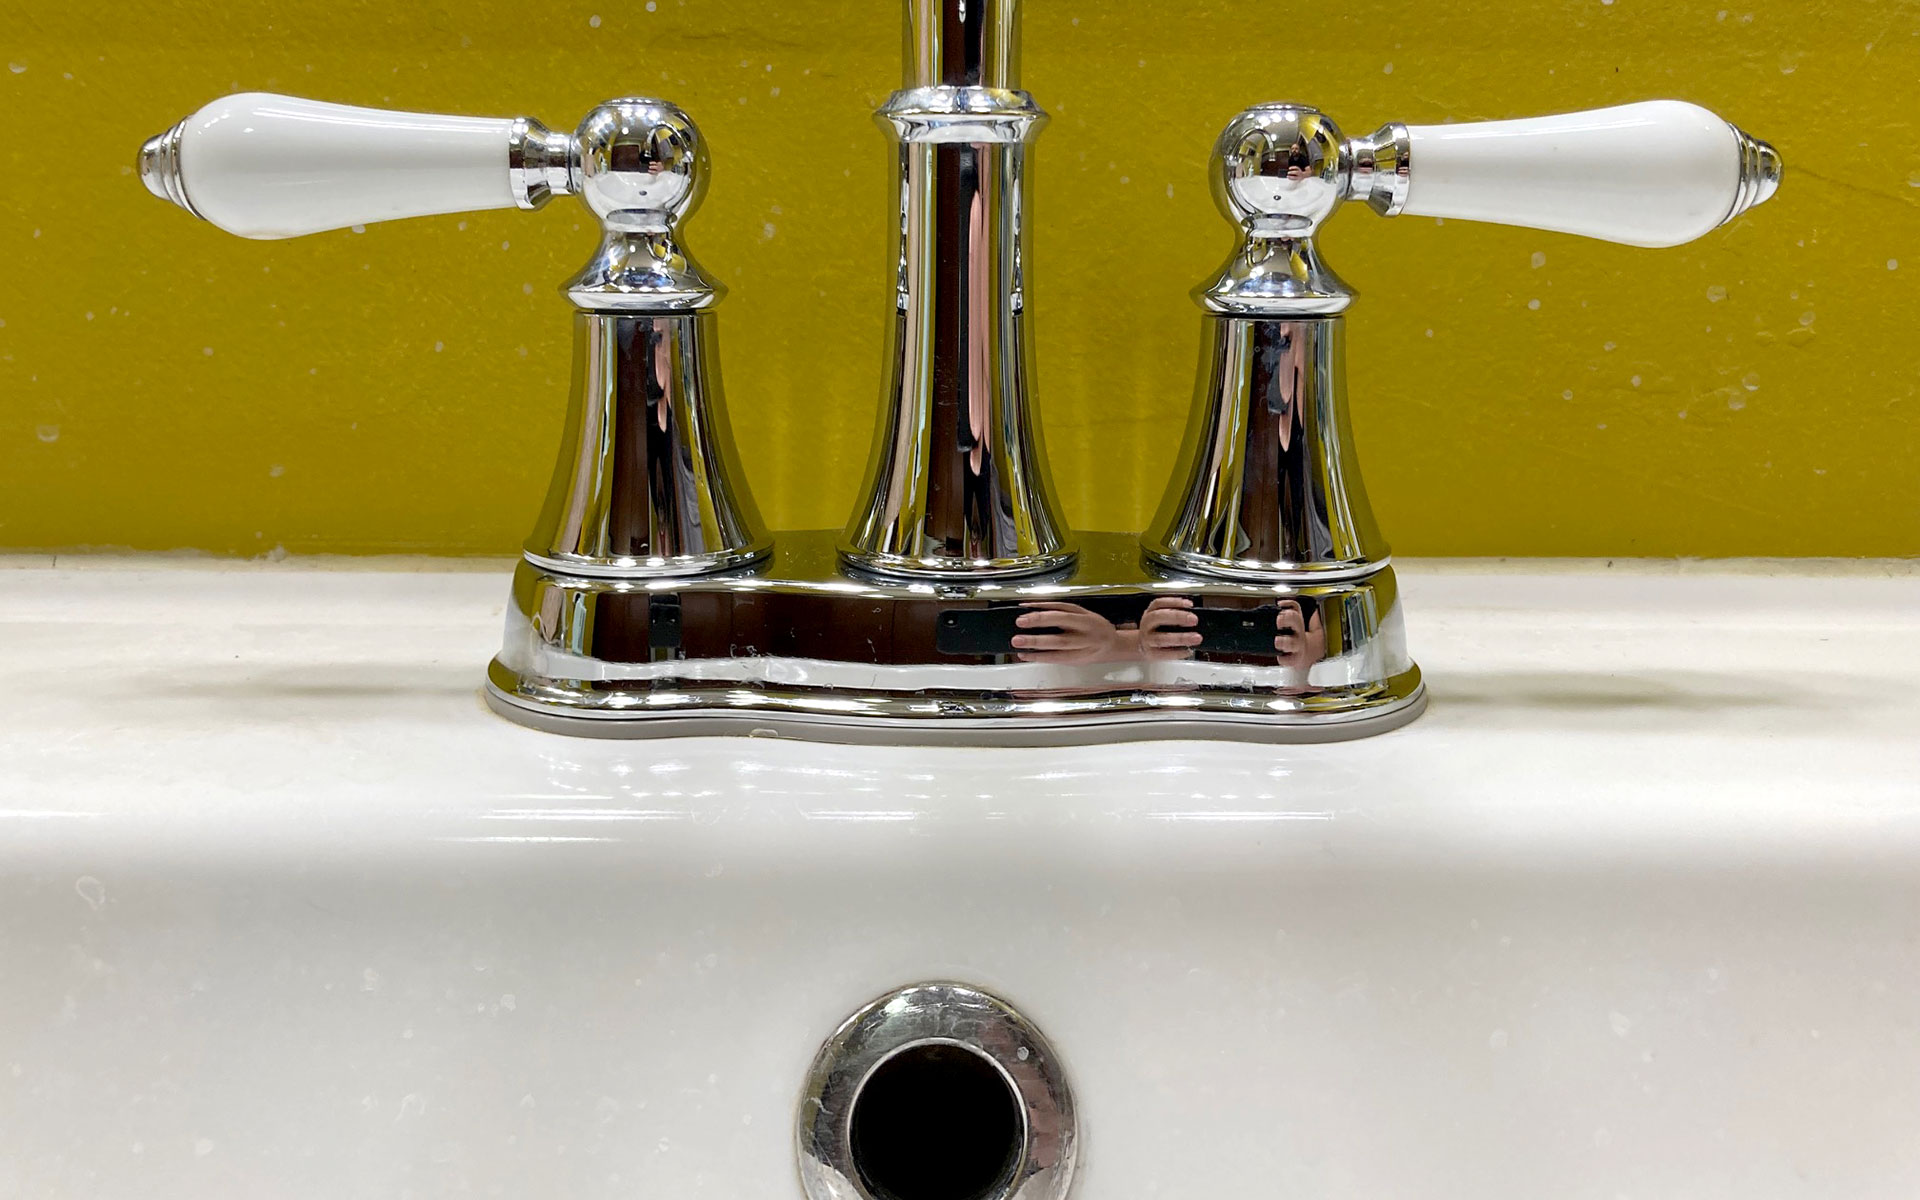 a chrome-plated nickel faucet